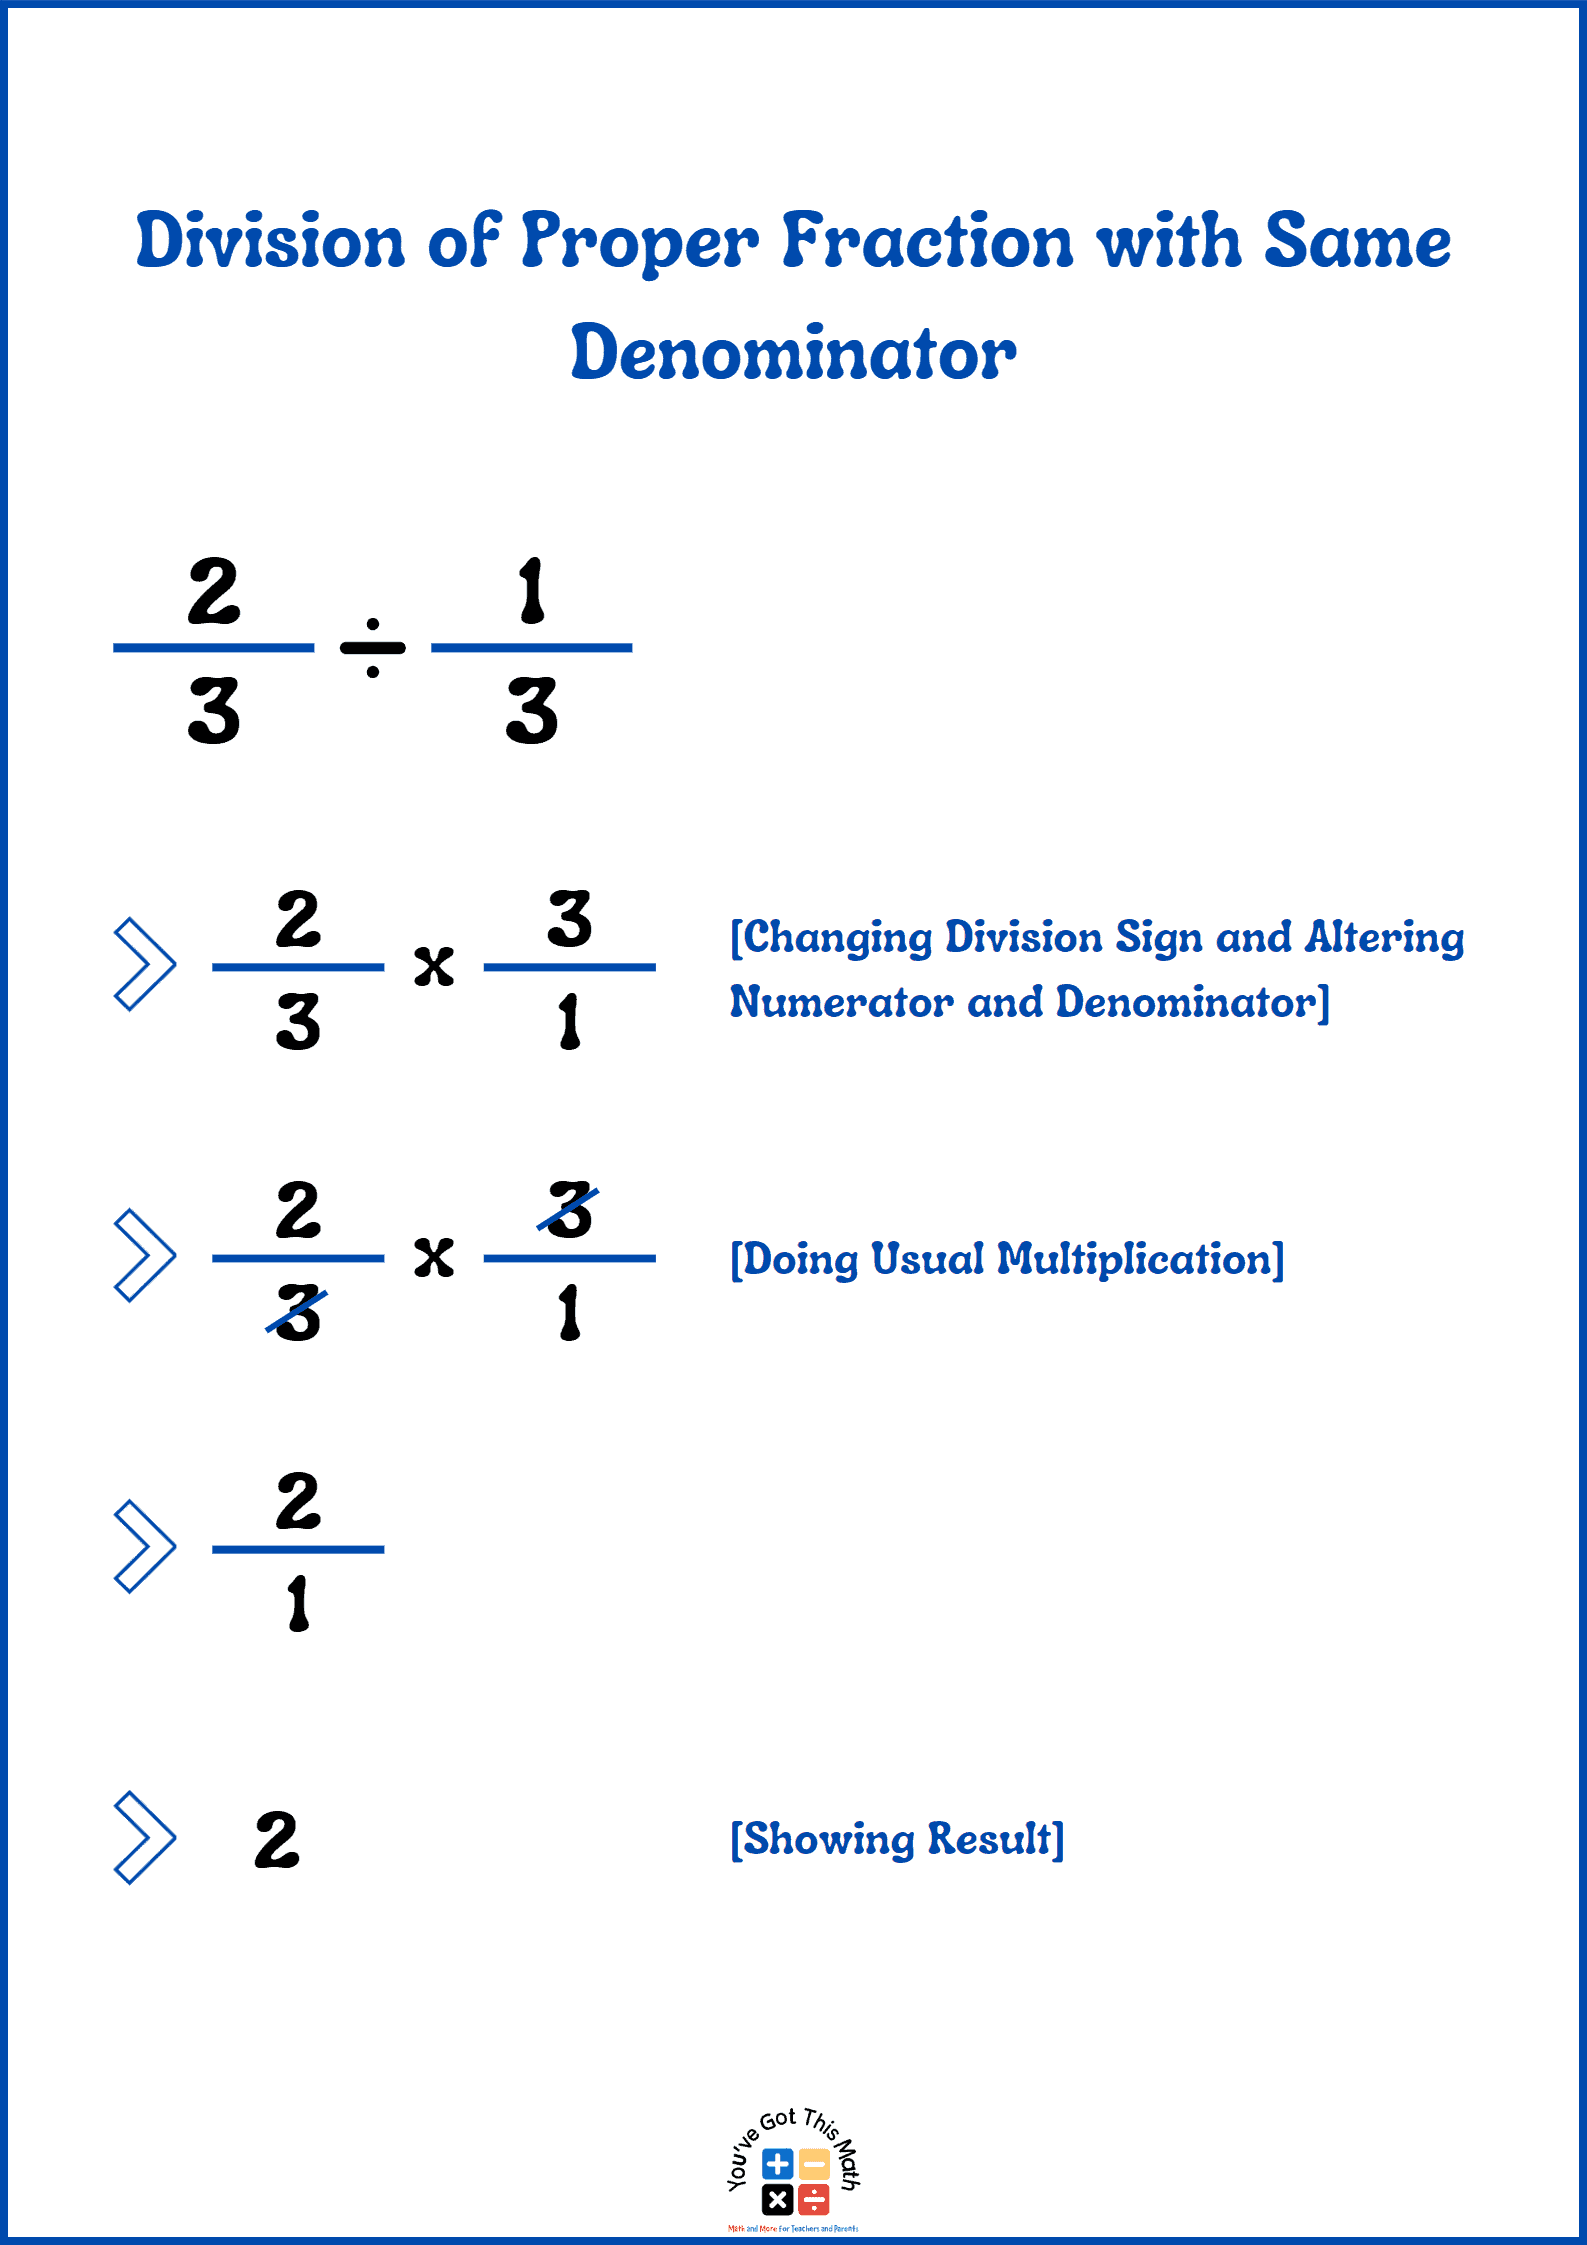 Showing Way of Dividing Proper Fractions with Same Denominator